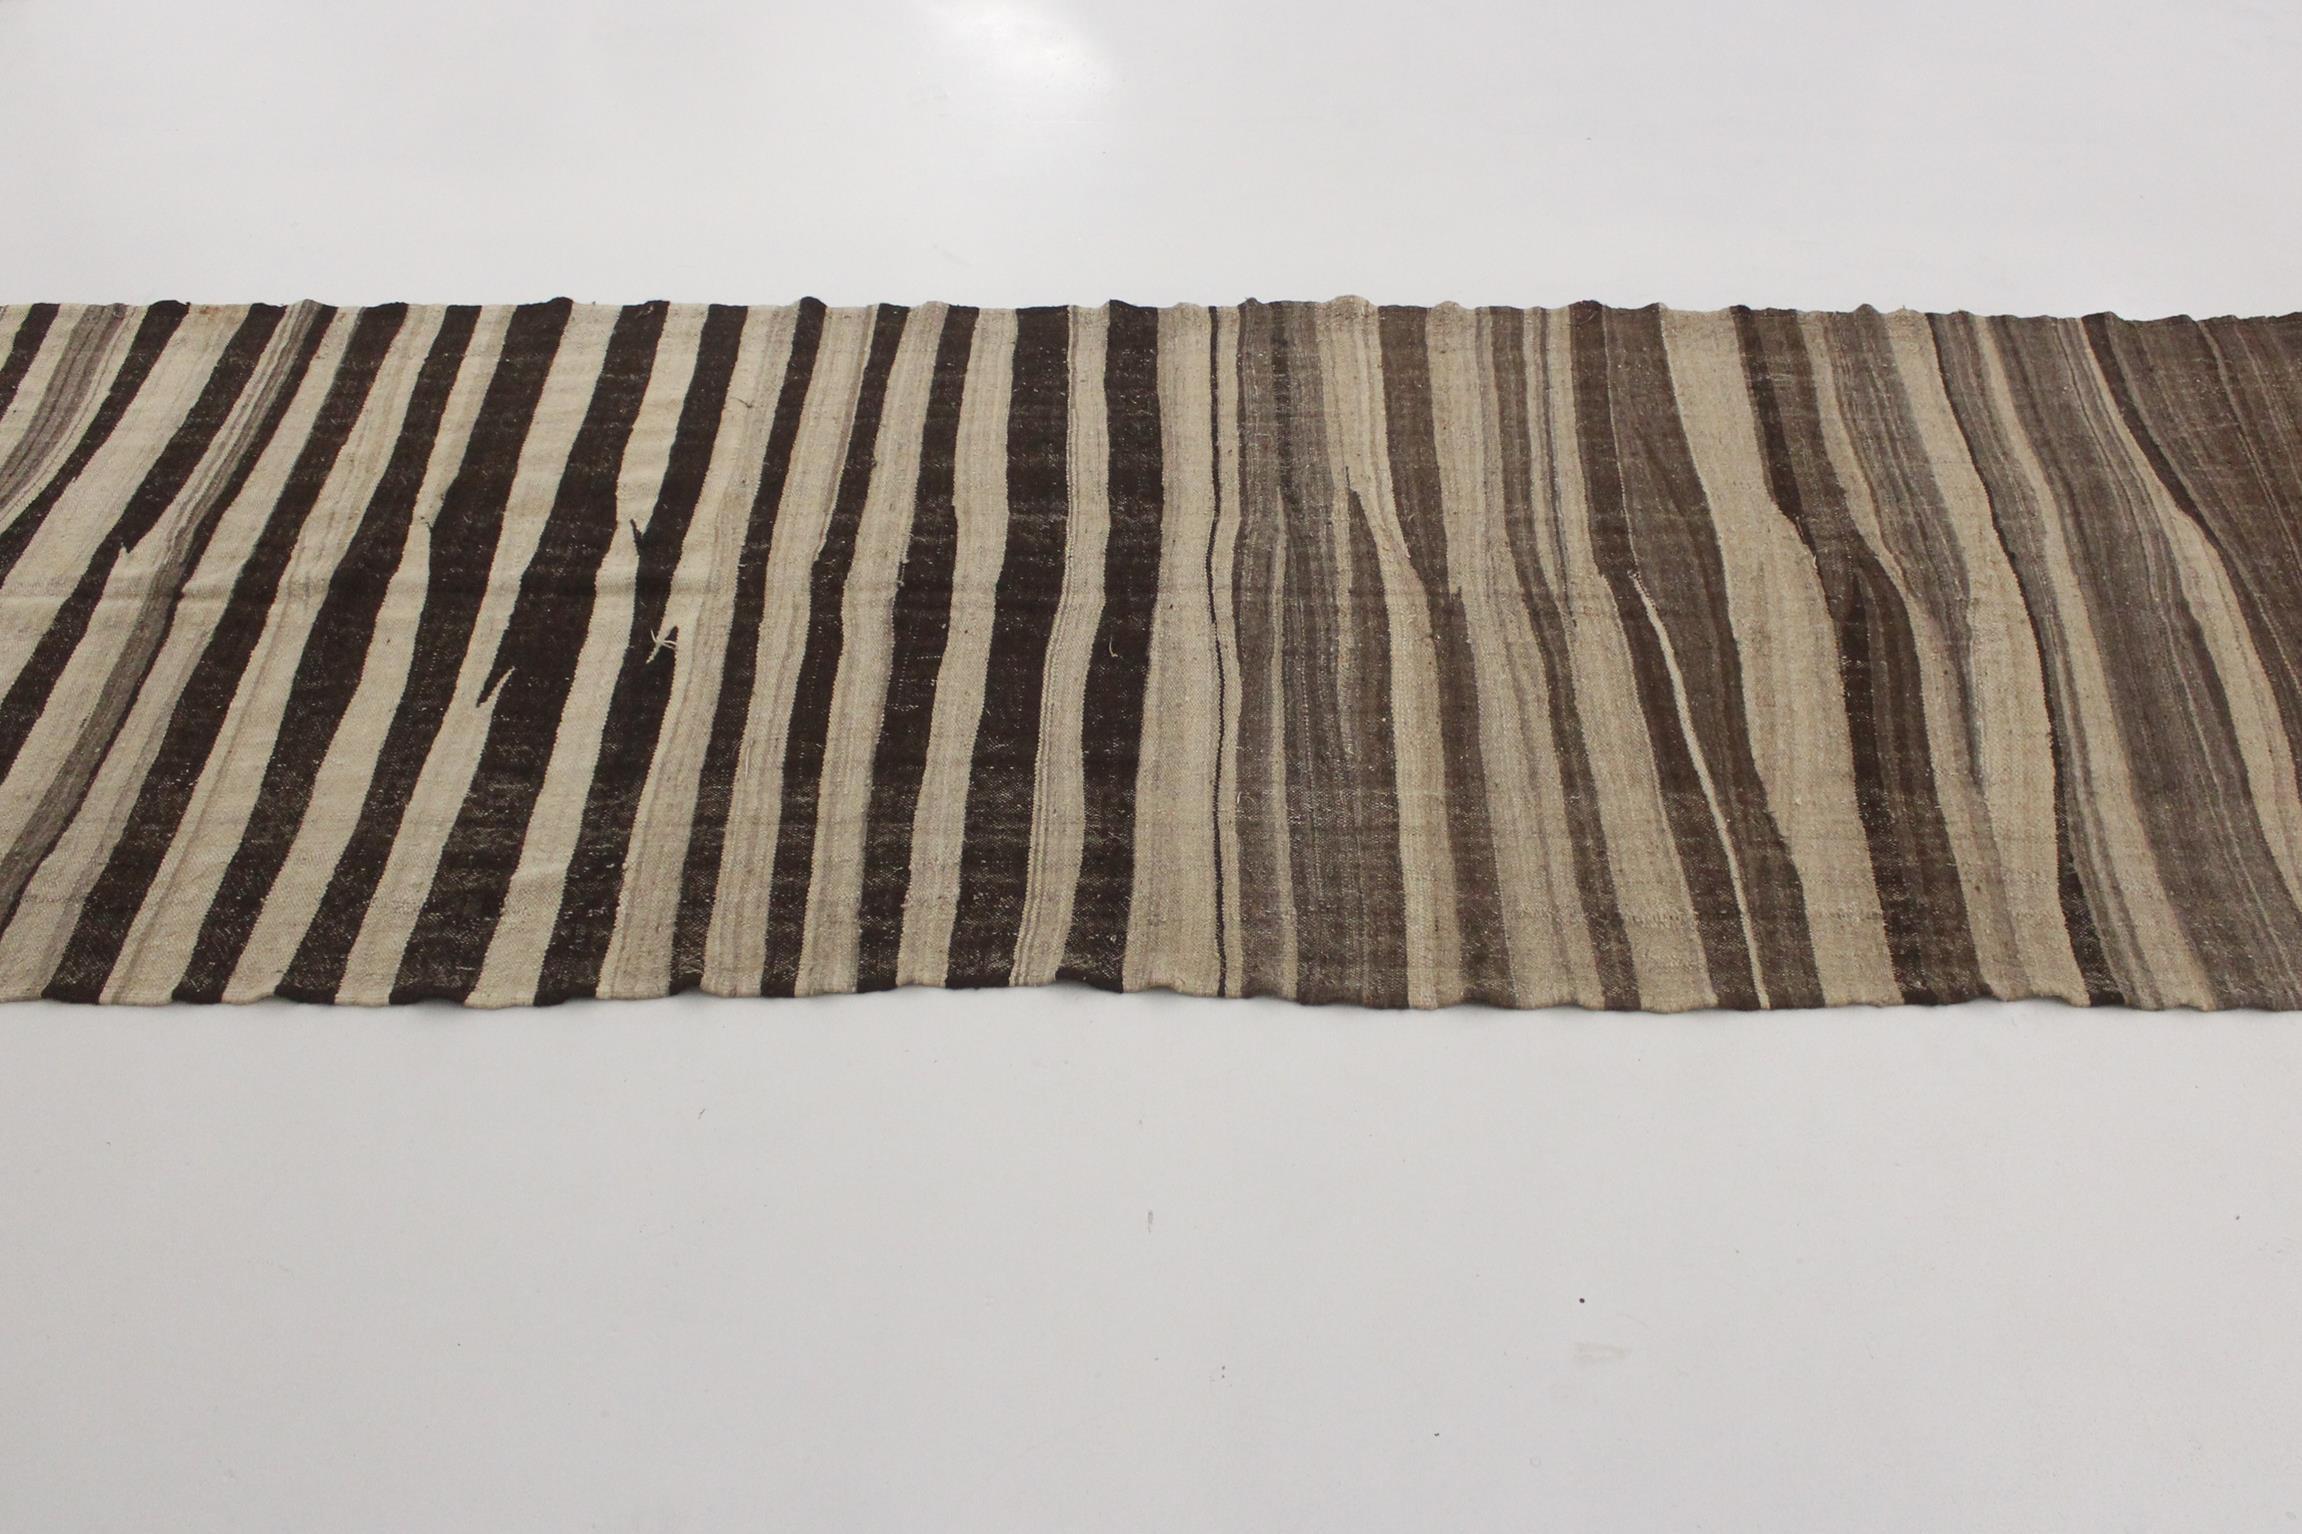 Hand-Woven Vintage Moroccan Kilim rug - Stripes in beige+brown - 4.6x14.4feet / 142x440cm For Sale